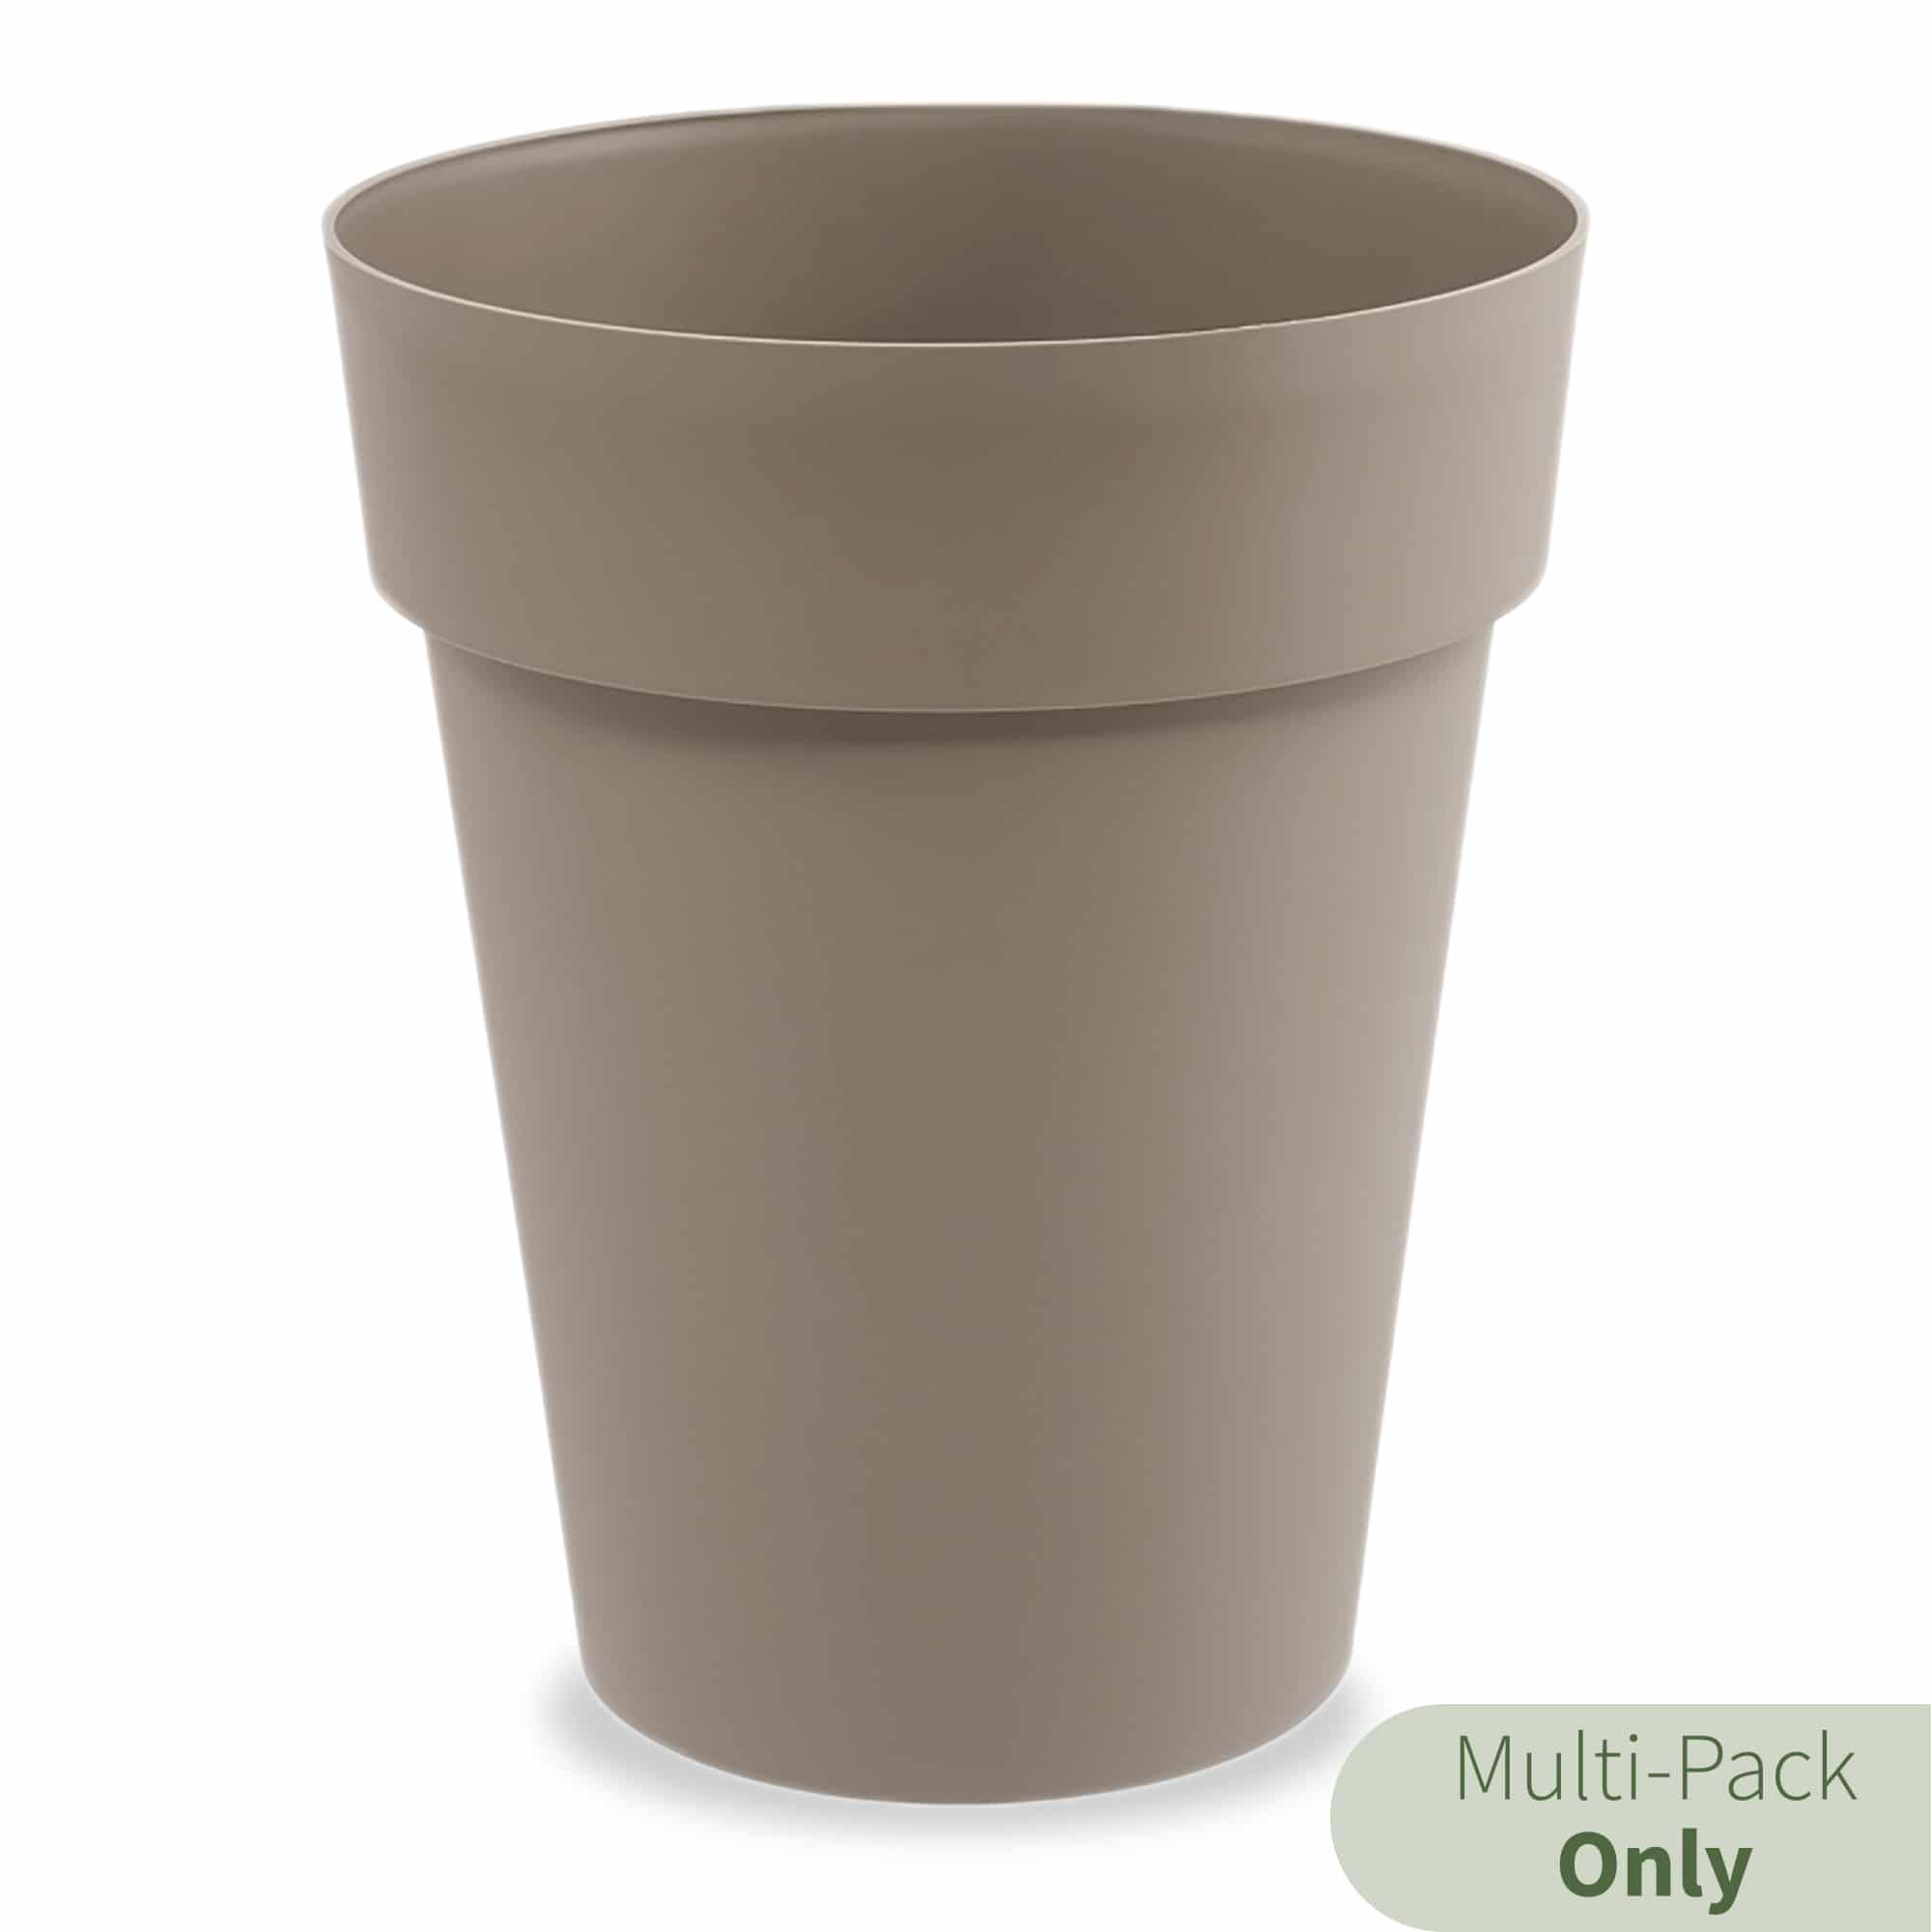 Pierre Tall Round Planters in Taupe Brown